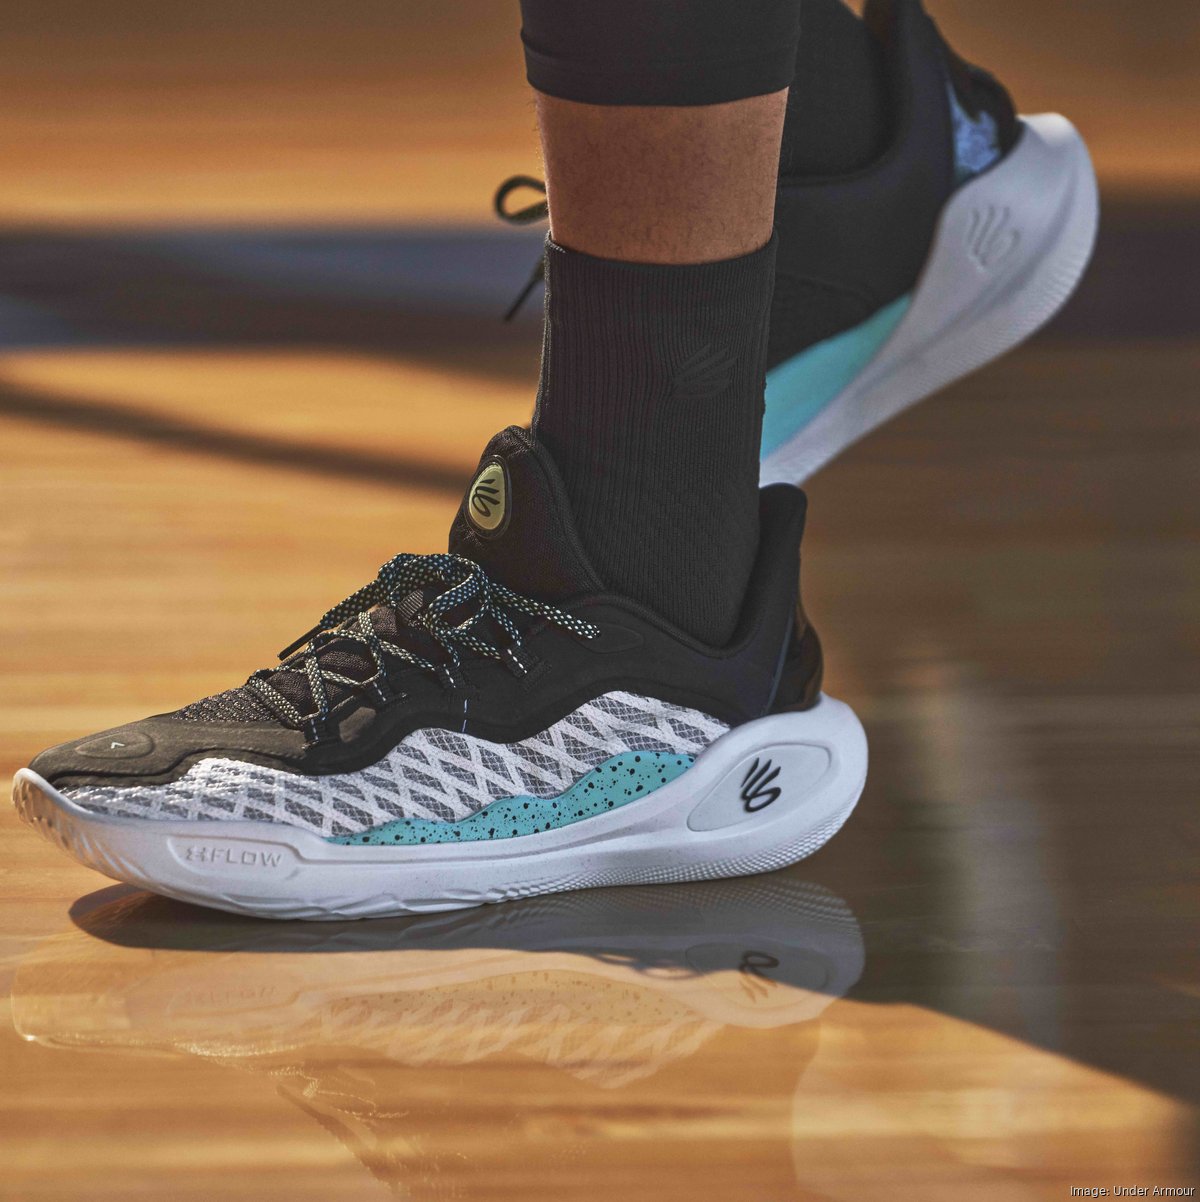 PHOTOS: Stephen Curry shoes this season